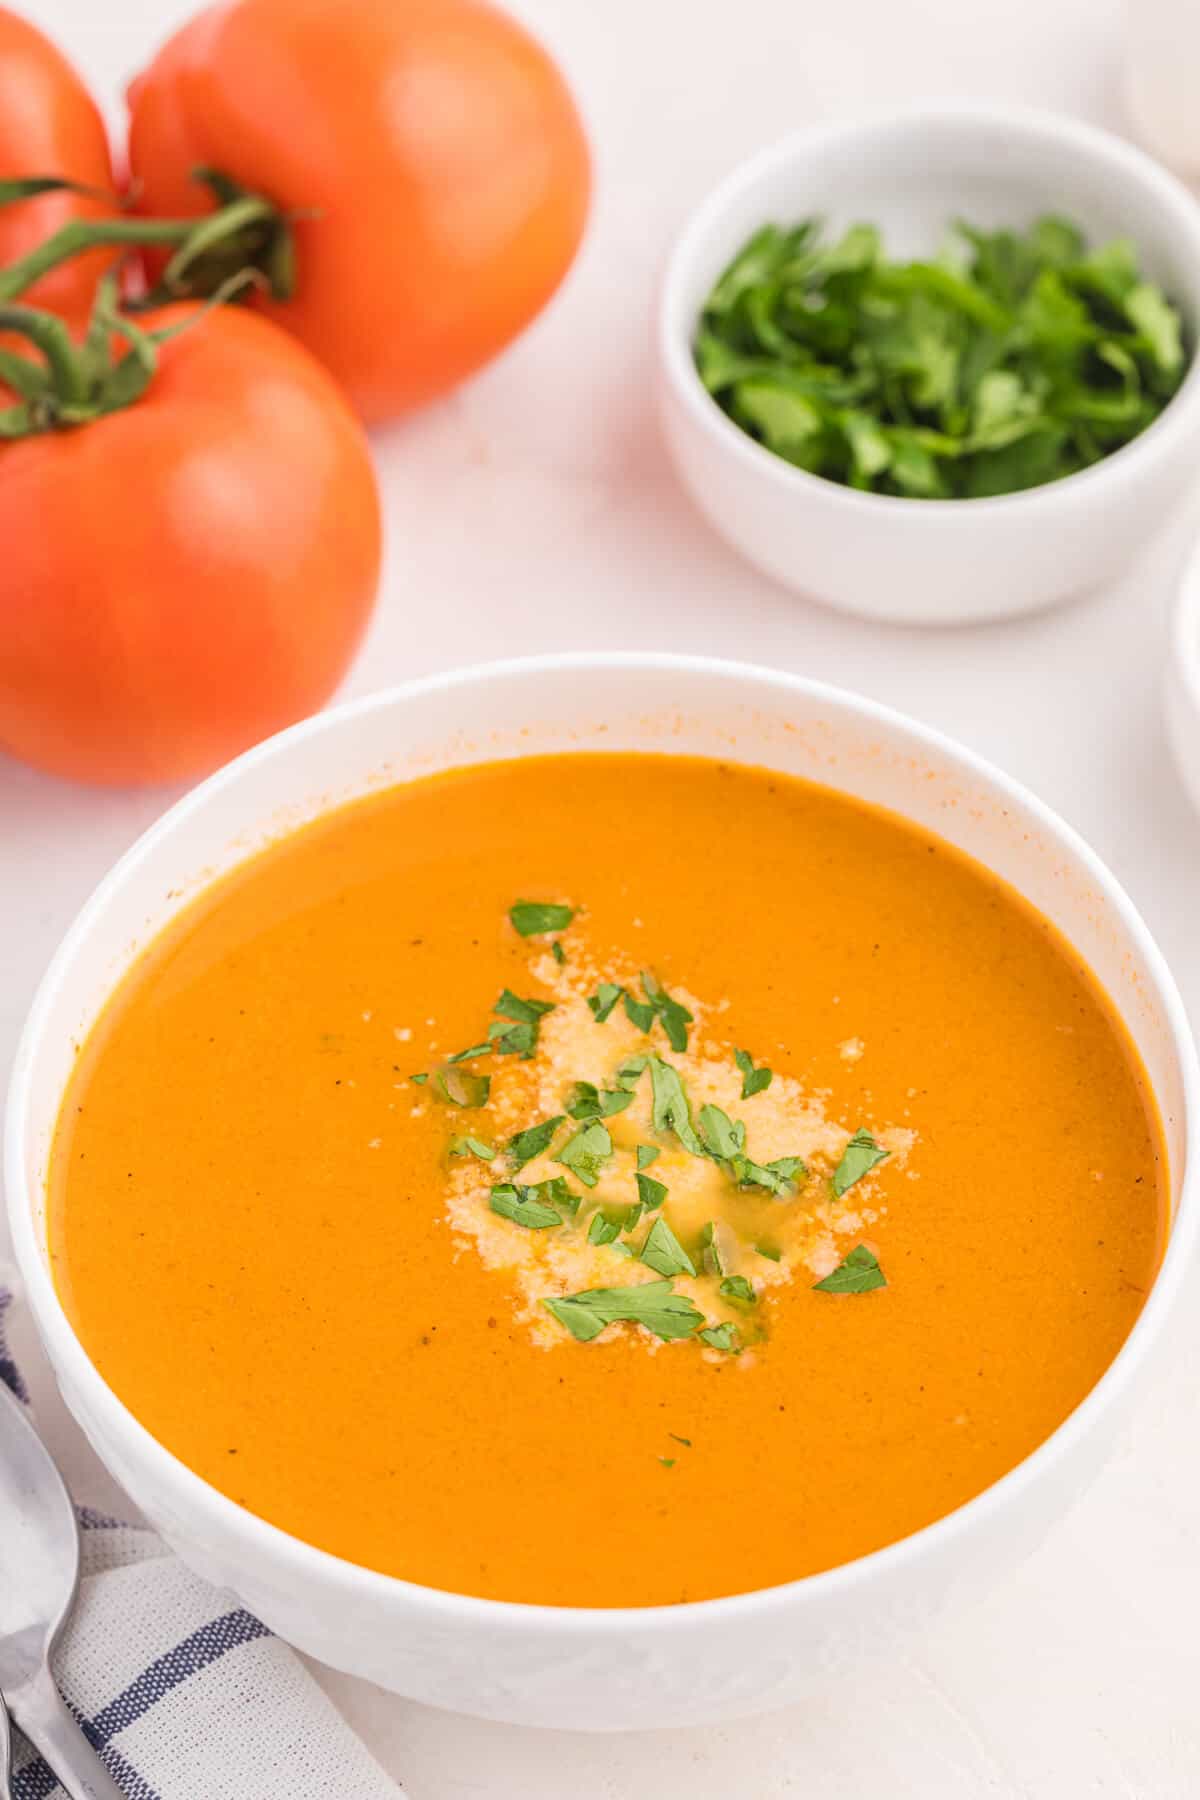 A bowl of roasted garlic and tomato soup.